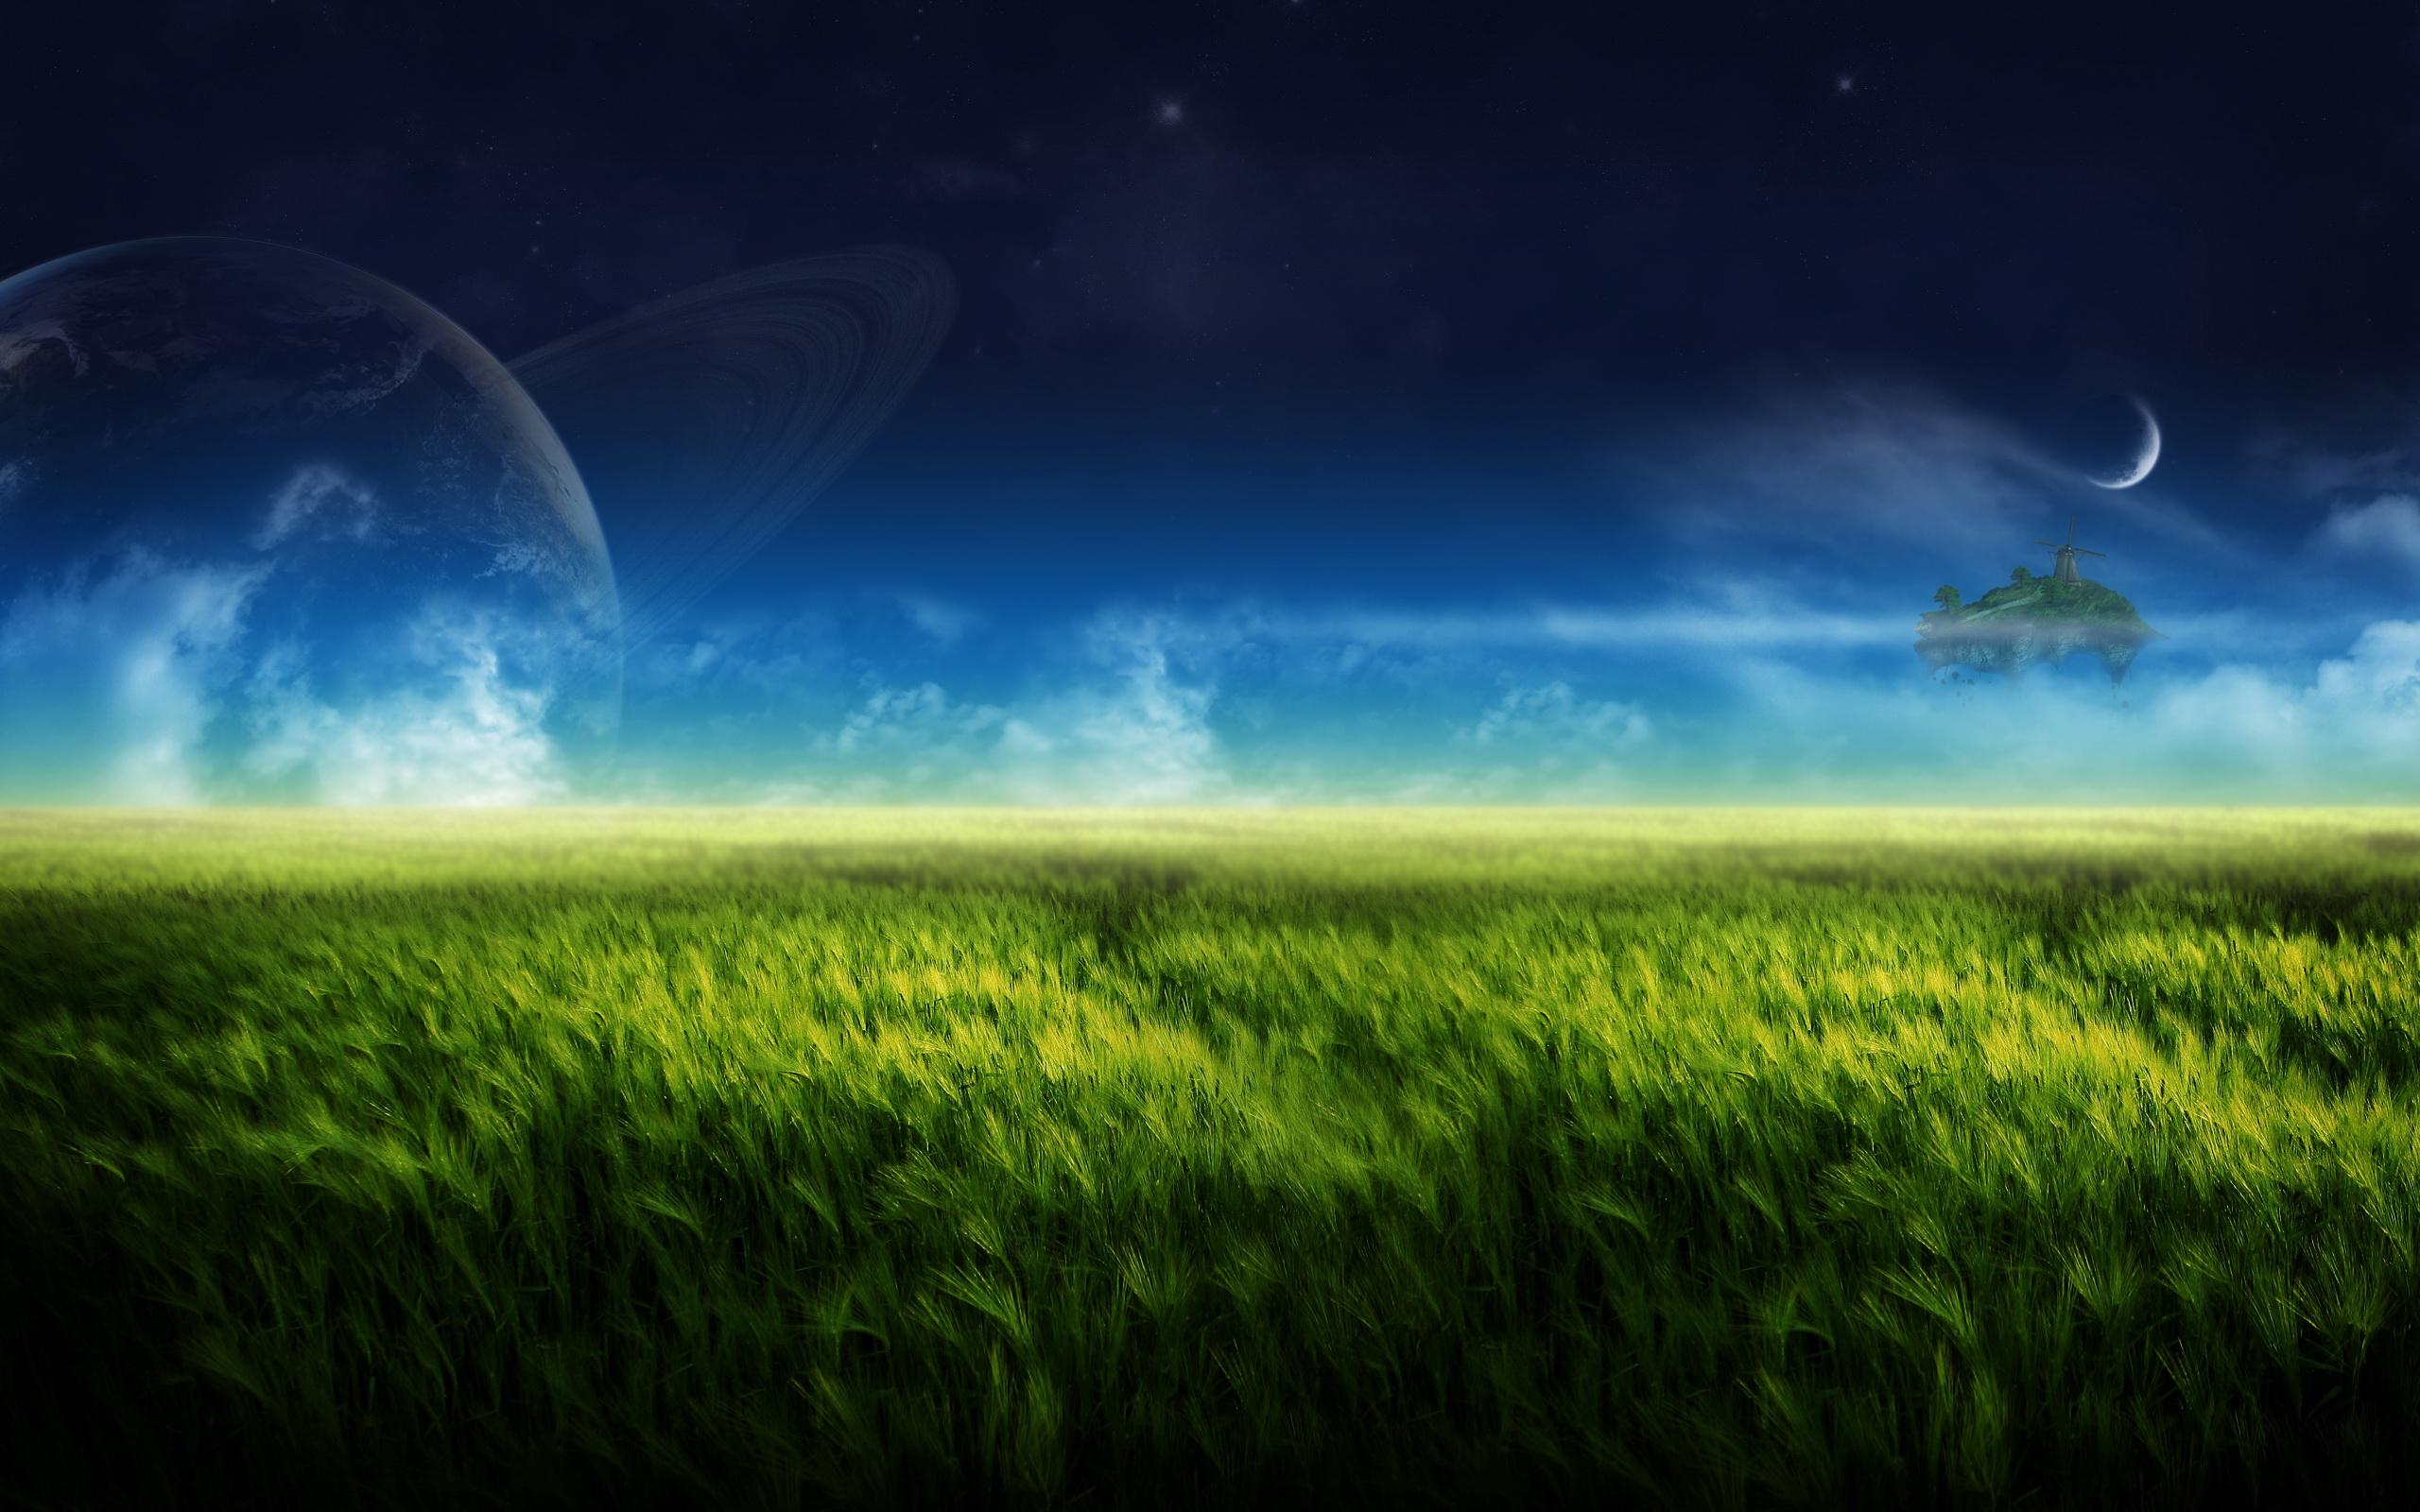 Vibrant field with green grass, planet, and clouds in the sky.